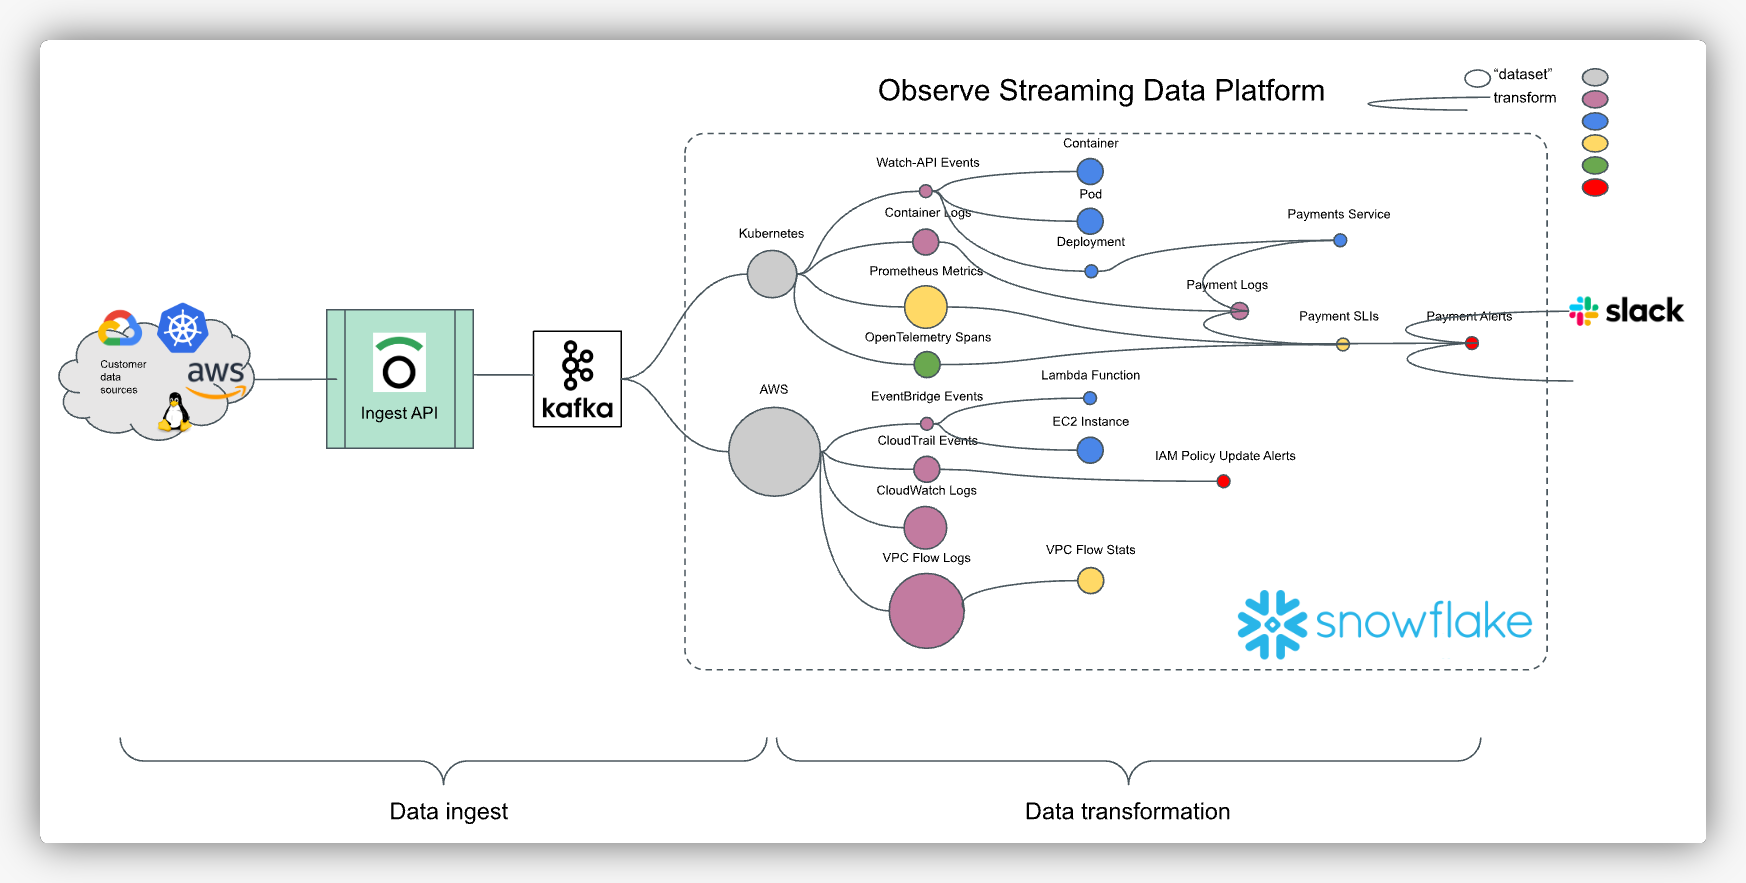 Observe data digestion diagram powered by snowflake